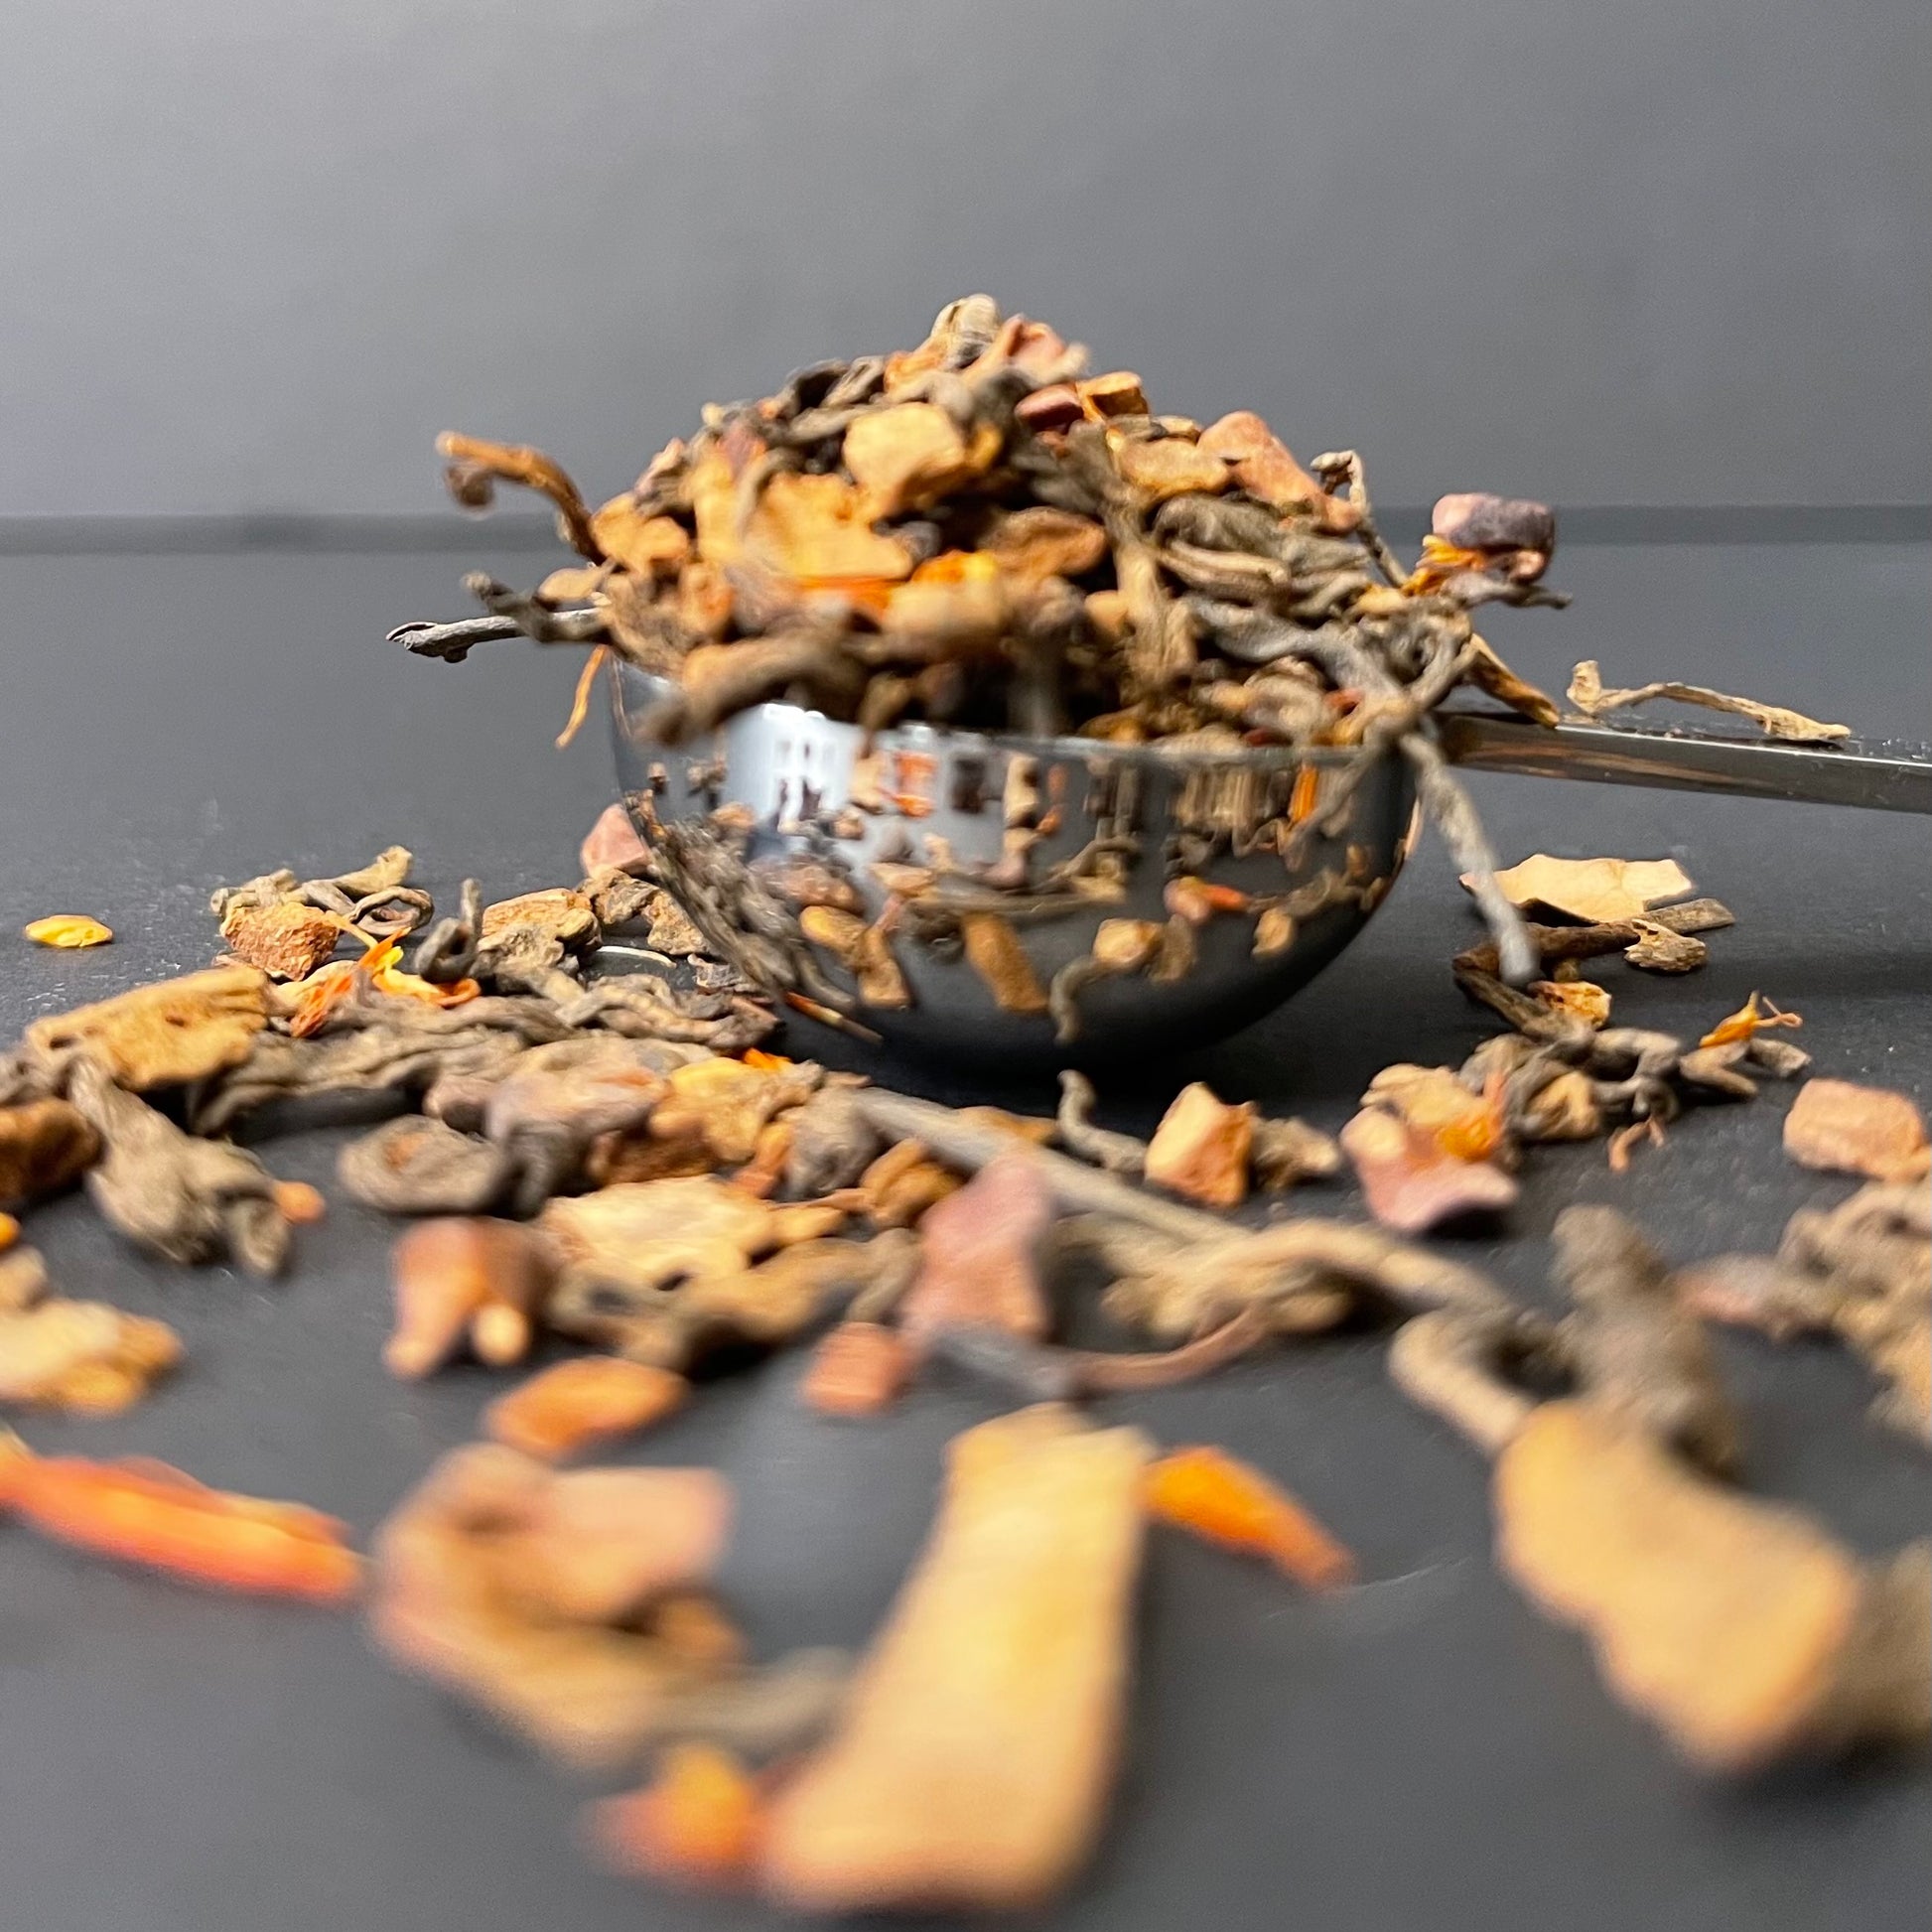 Kicking It Aztec | Luxury Puerh Tea Blend woth Cacao, Chili Peppers, & Cinnamon | The Cove Tea Company | Spruce Grove AB Canada 